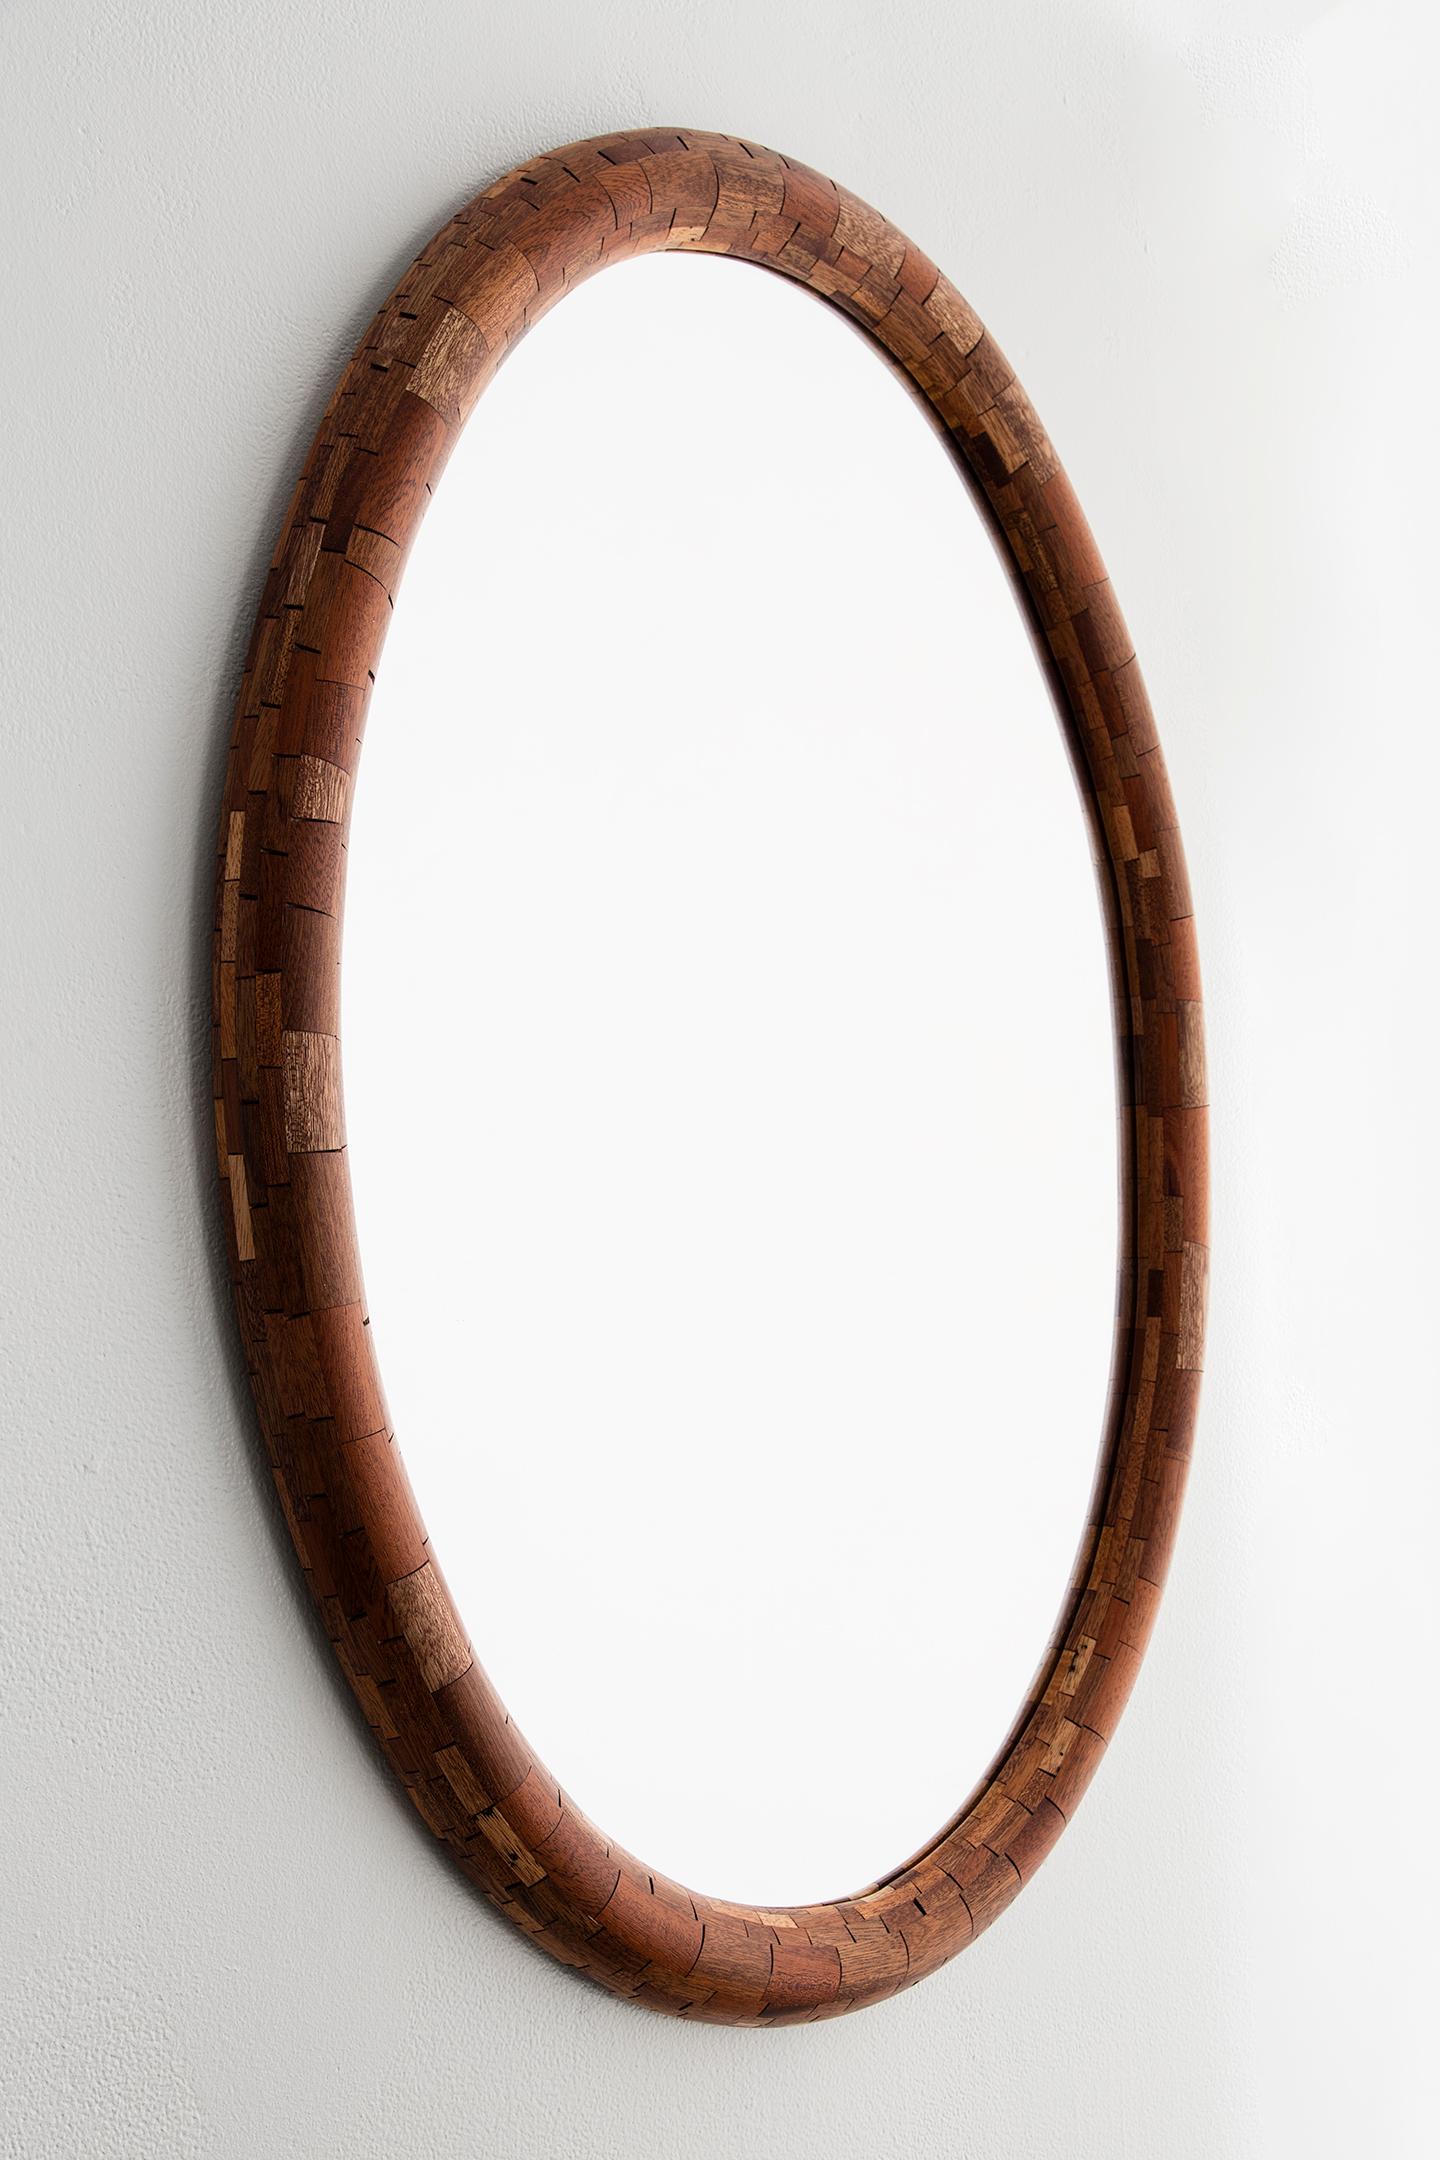 Polished Customizable STACKED Wooden Oval Mirror by Richard Haining, shown in Walnut For Sale